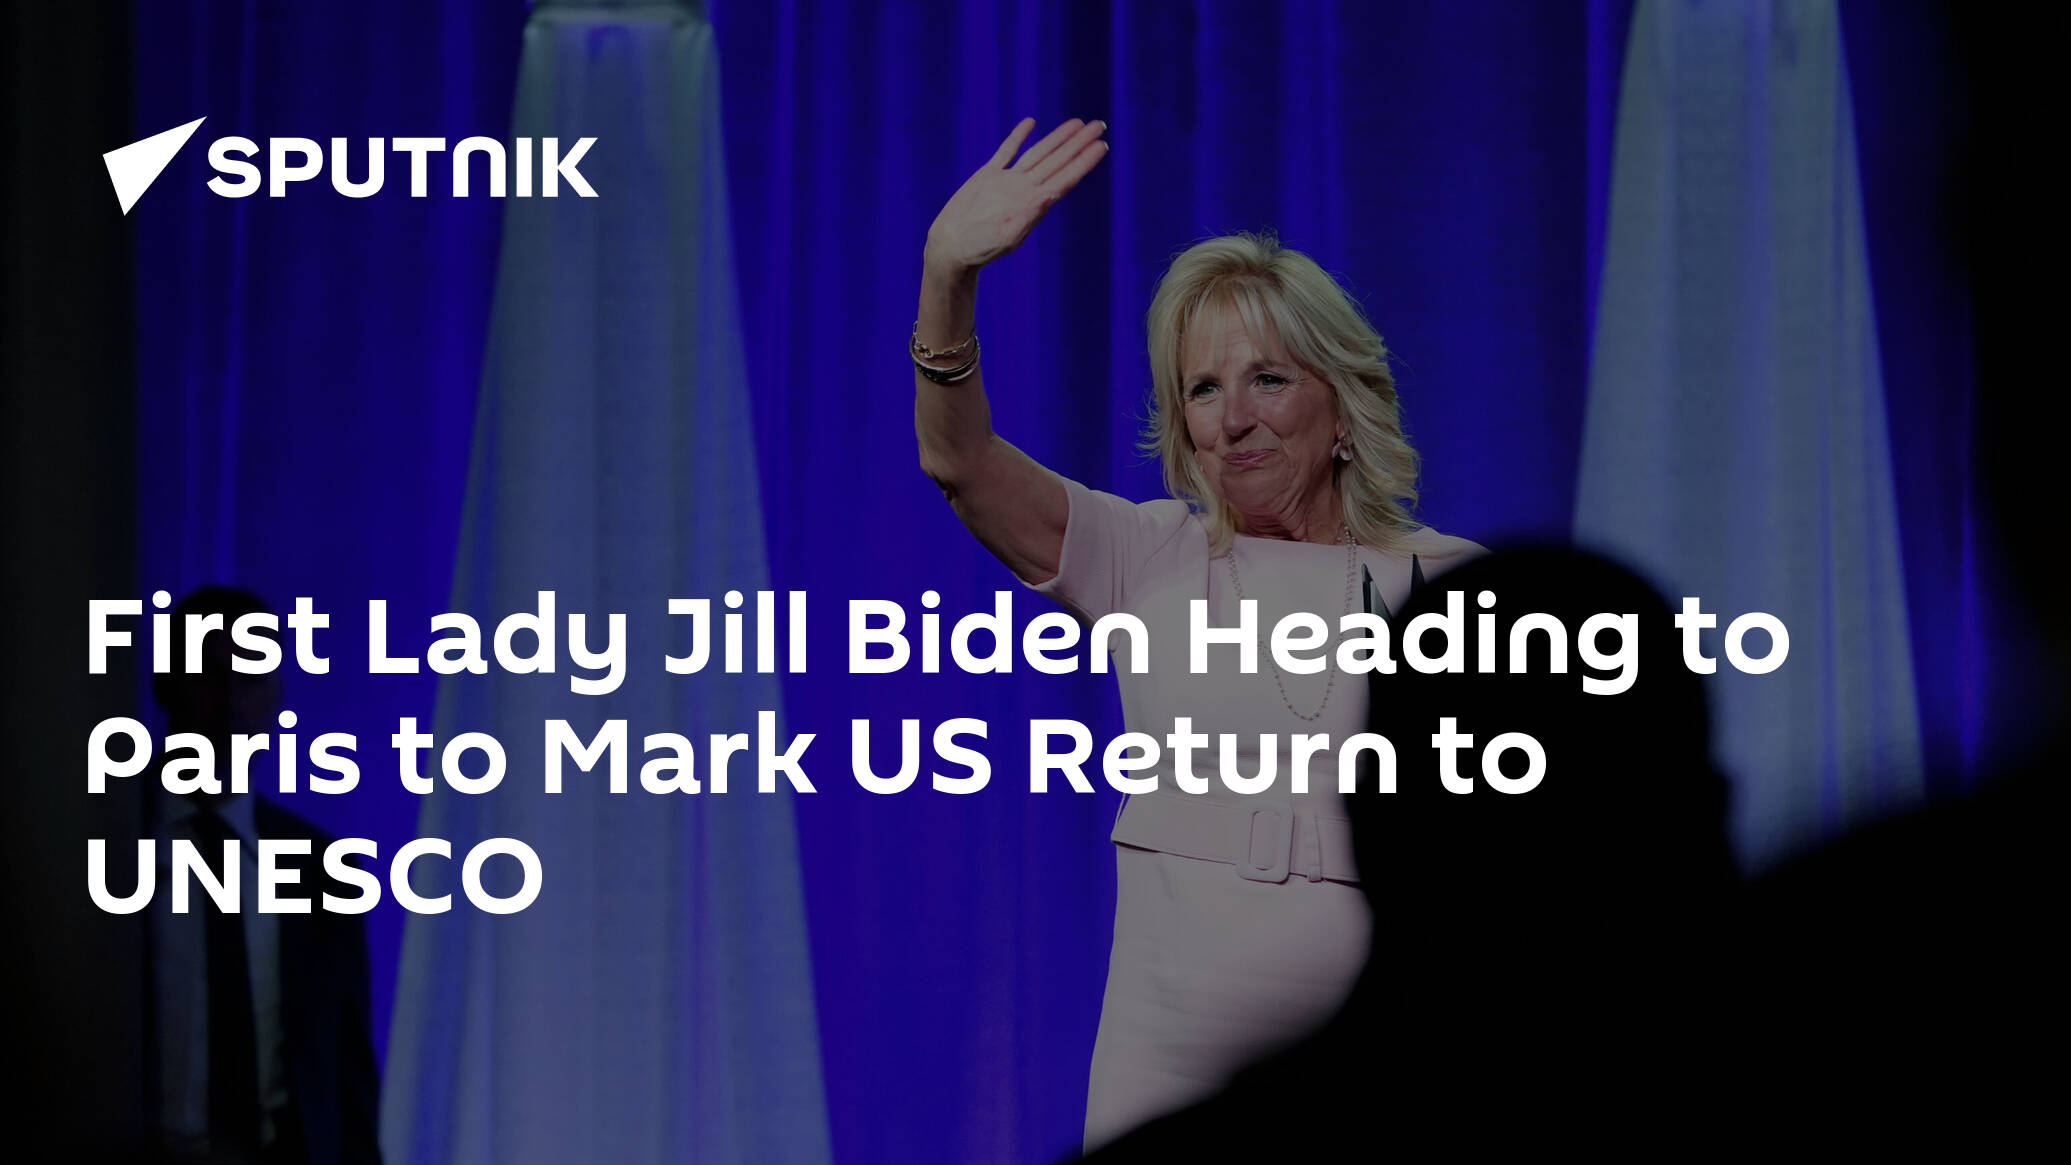 PREVIEW – First Lady Jill Biden Heading to Paris to Mark US Return to UNESCO